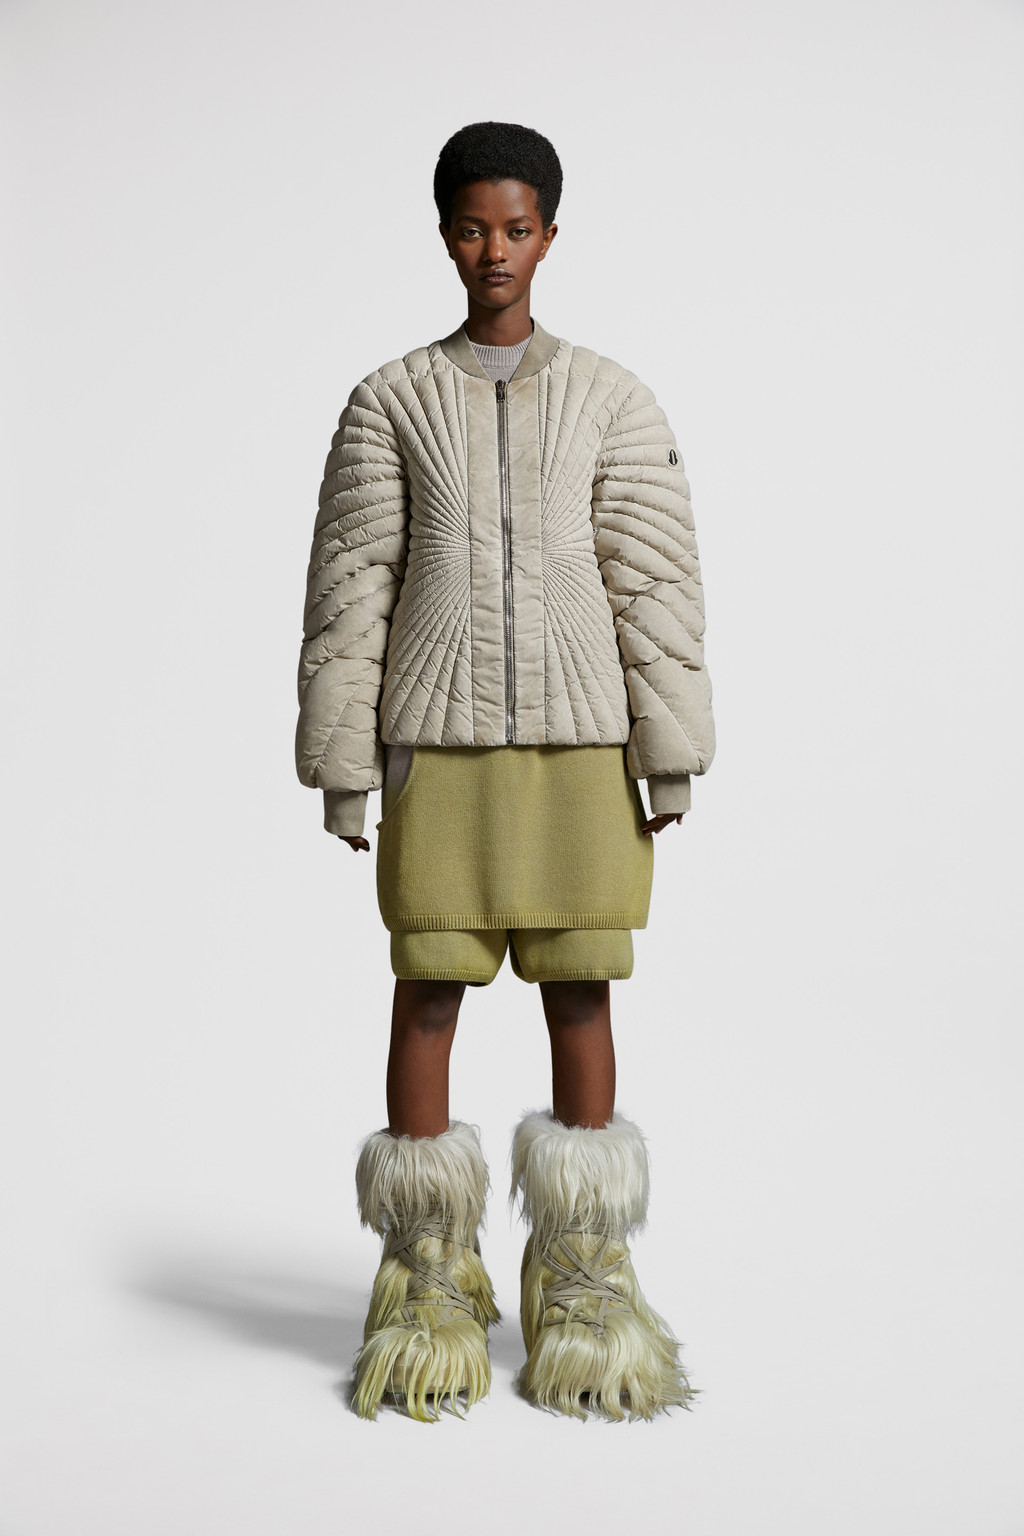 For Special Projects - Moncler + Rick Owens | Moncler IT